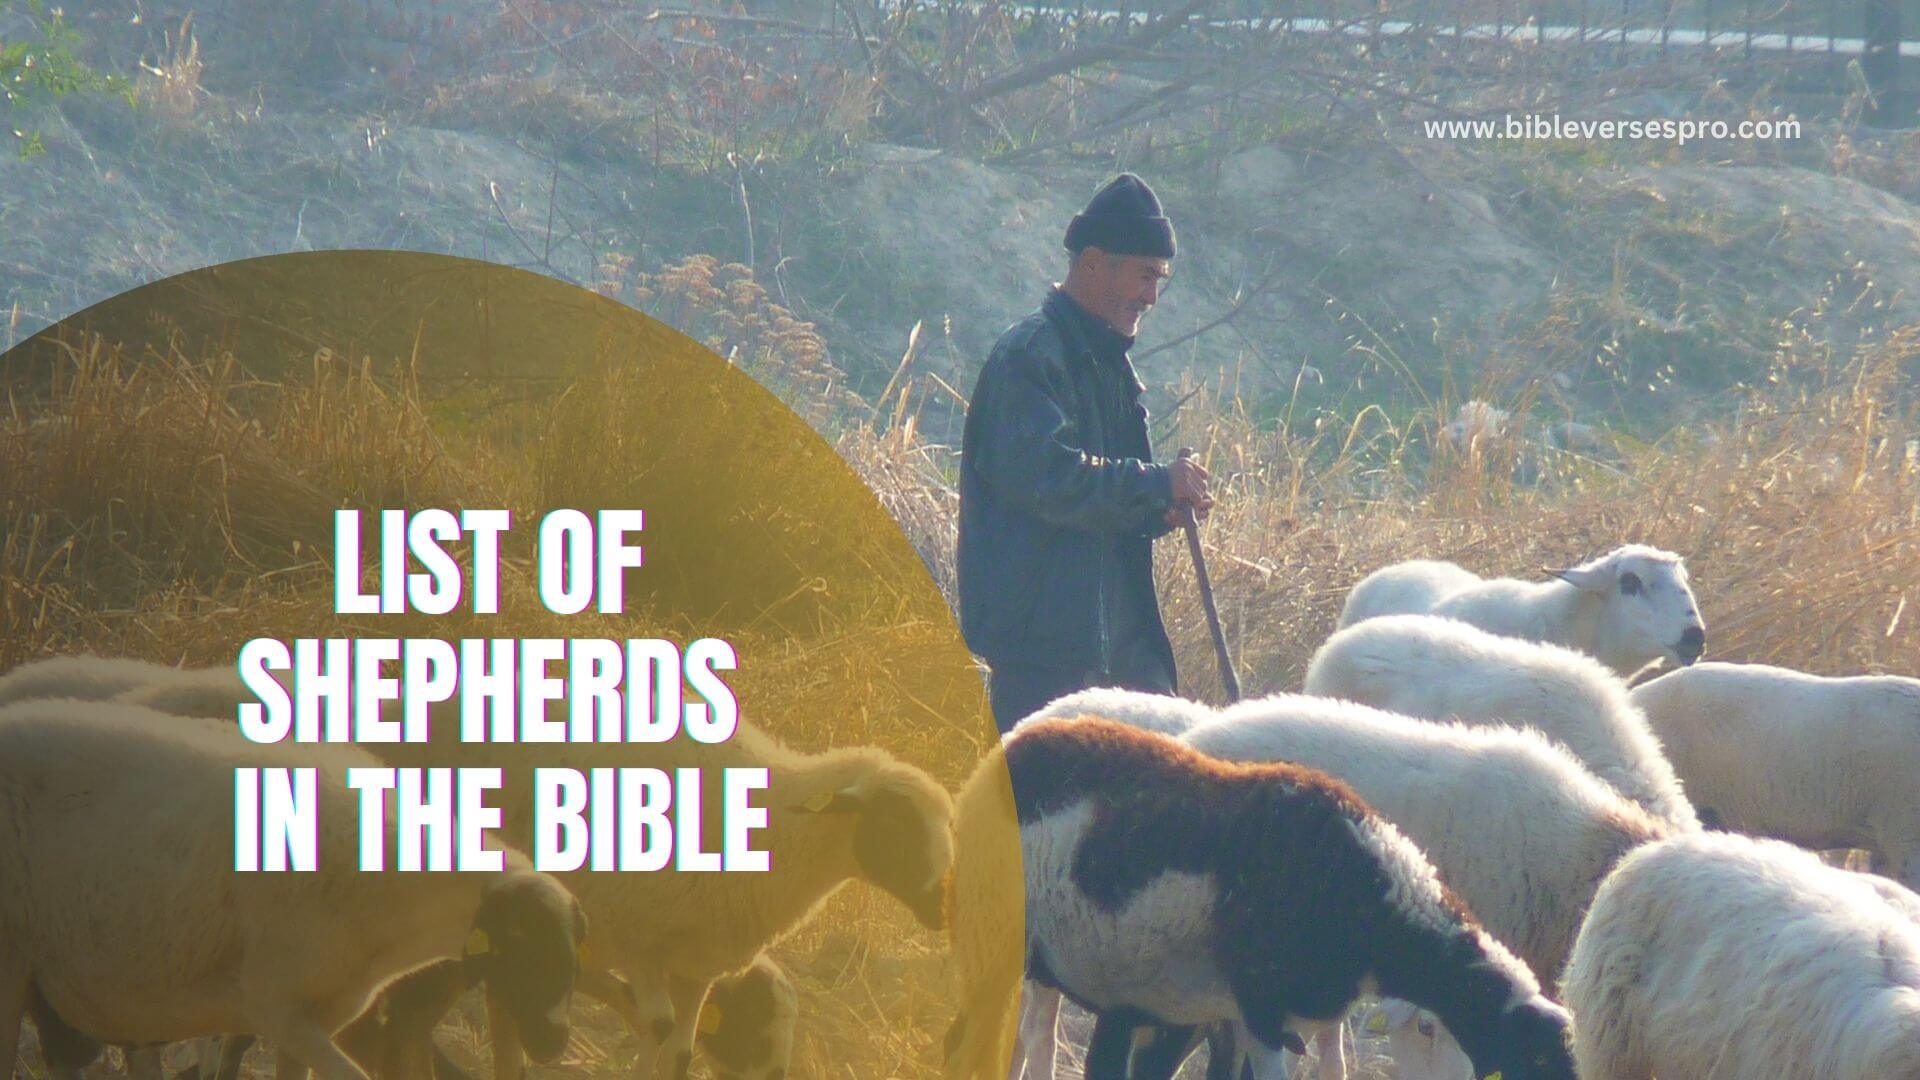 LIST OF SHEPHERDS IN THE BIBLE (1)